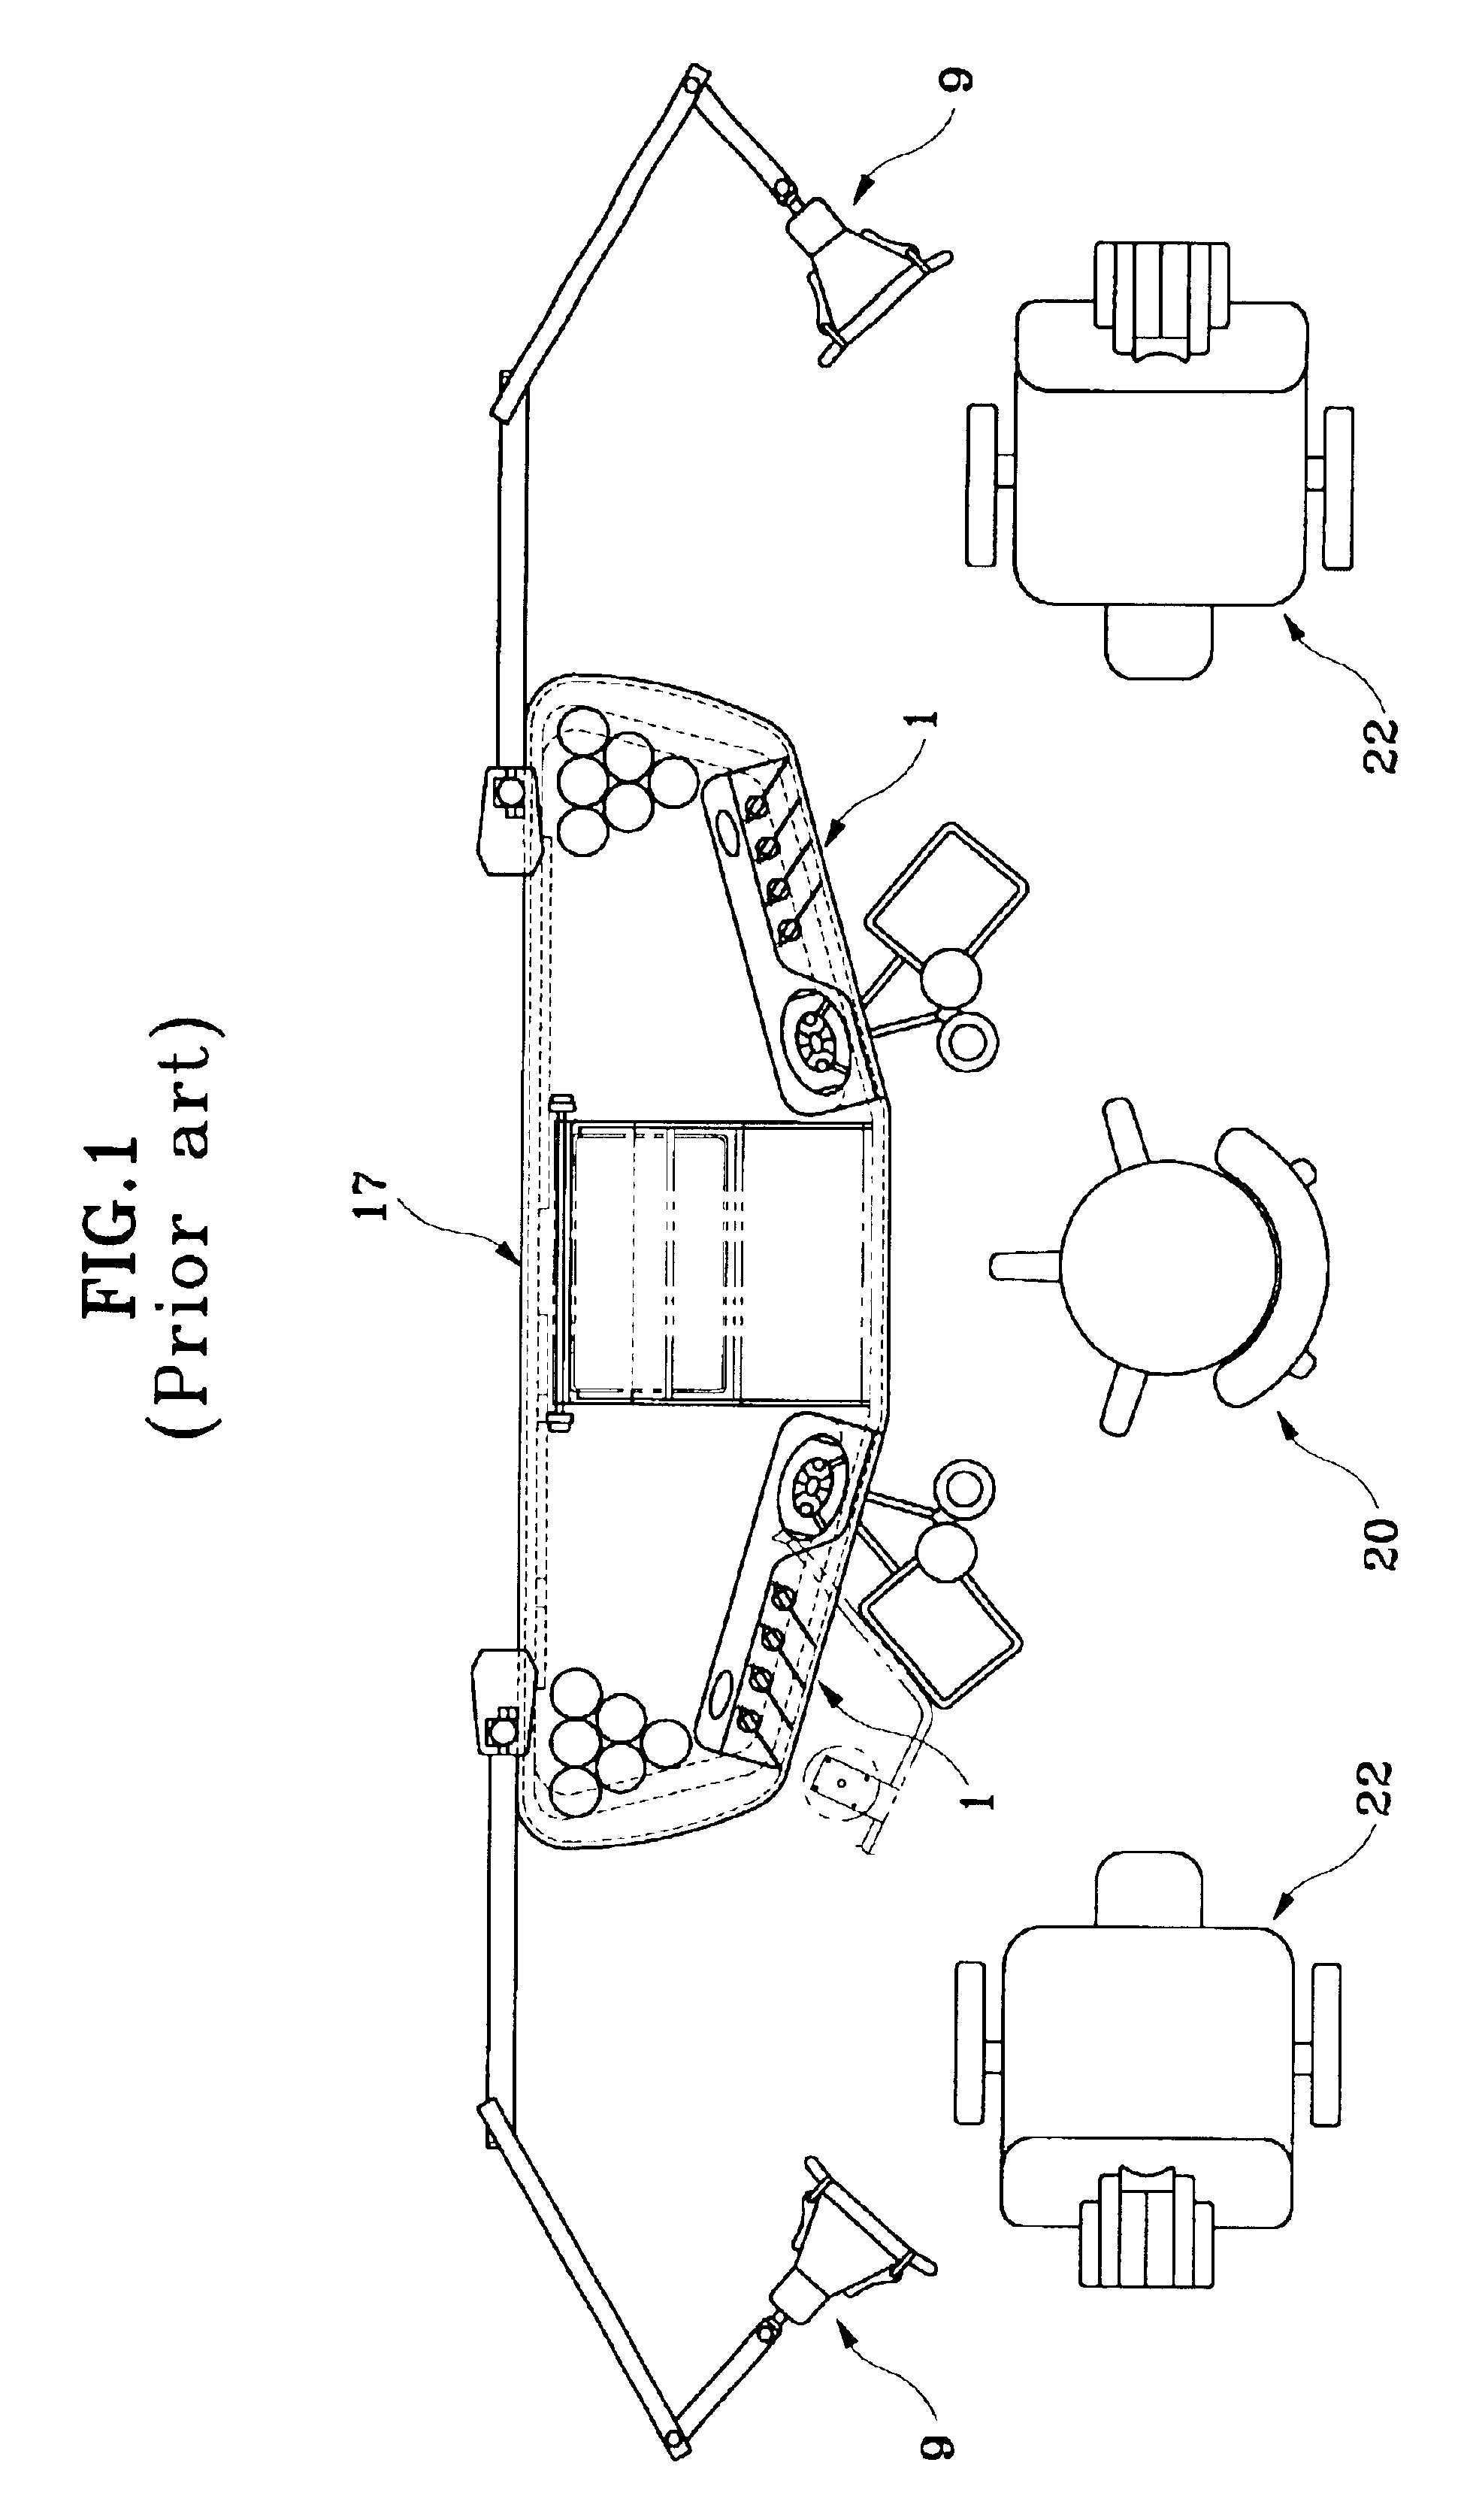 Rotating patient chair with ear diagnosis and treatment unit